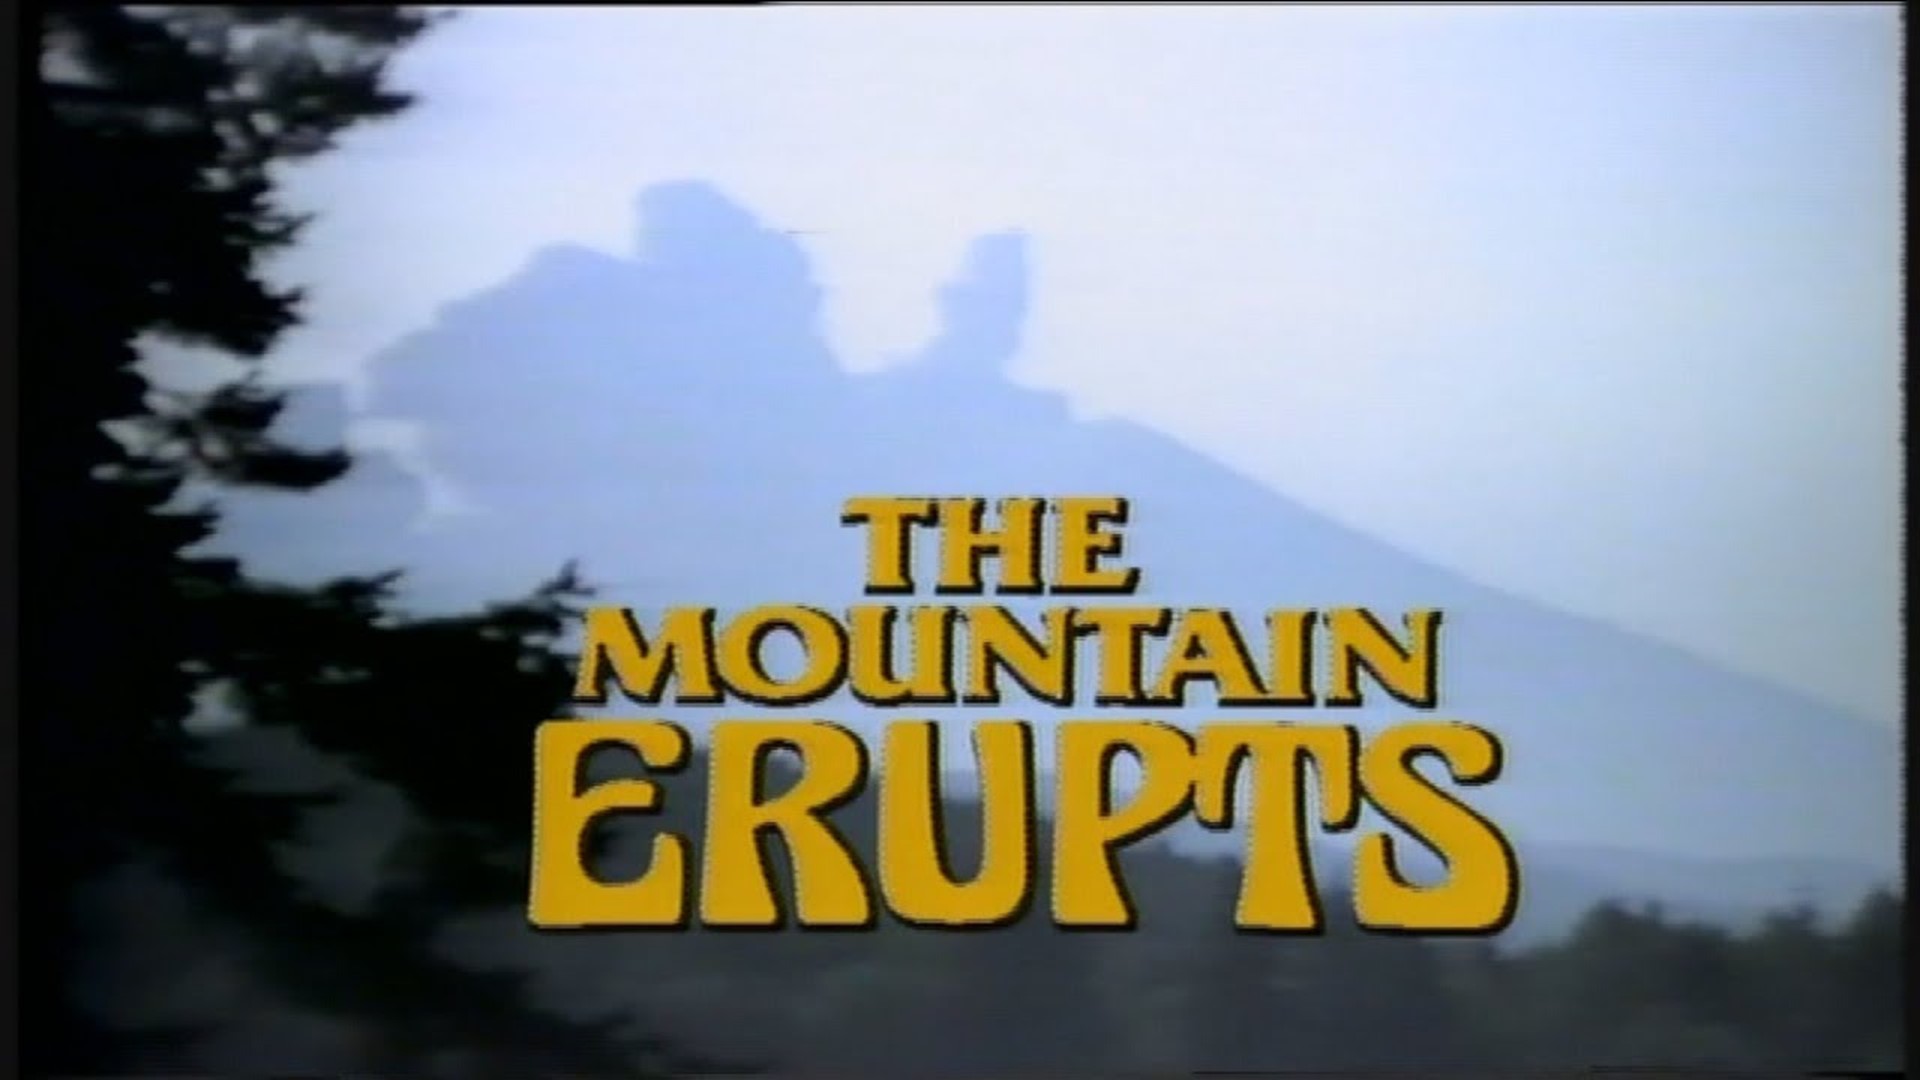 A KING 5 special report from 1980 following the eruption of Mount St. Helens.